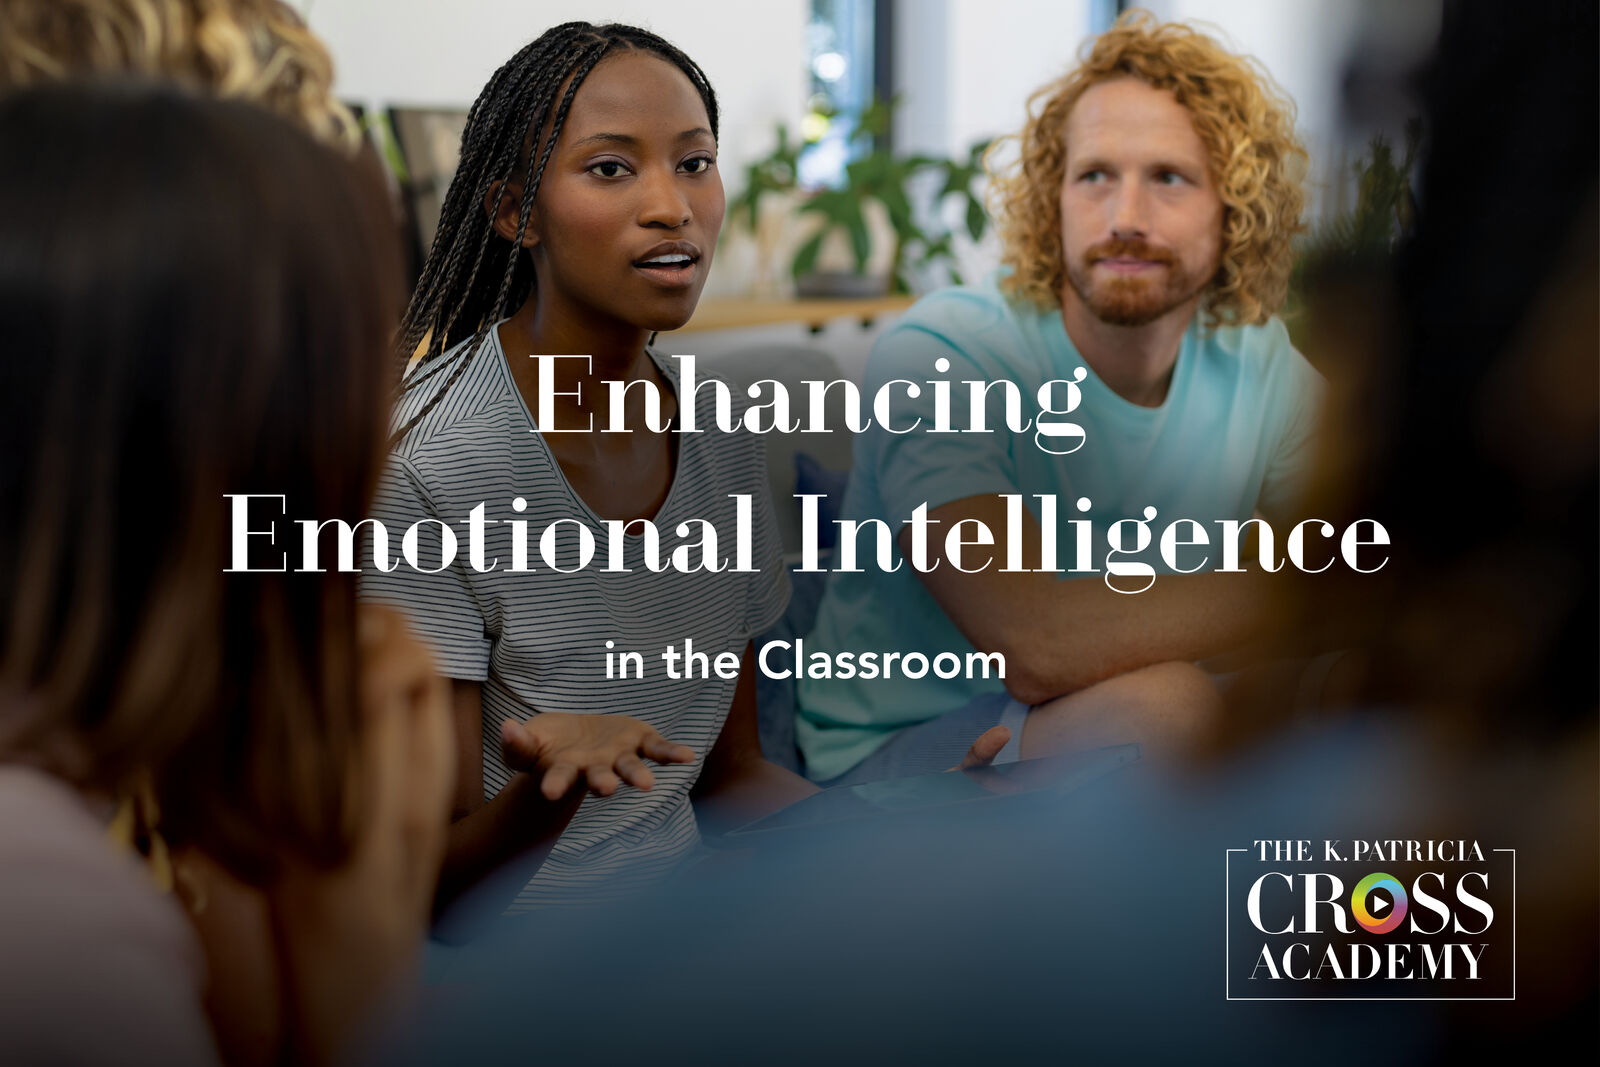 Featured image for “Enhancing Emotional Intelligence in the Classroom”